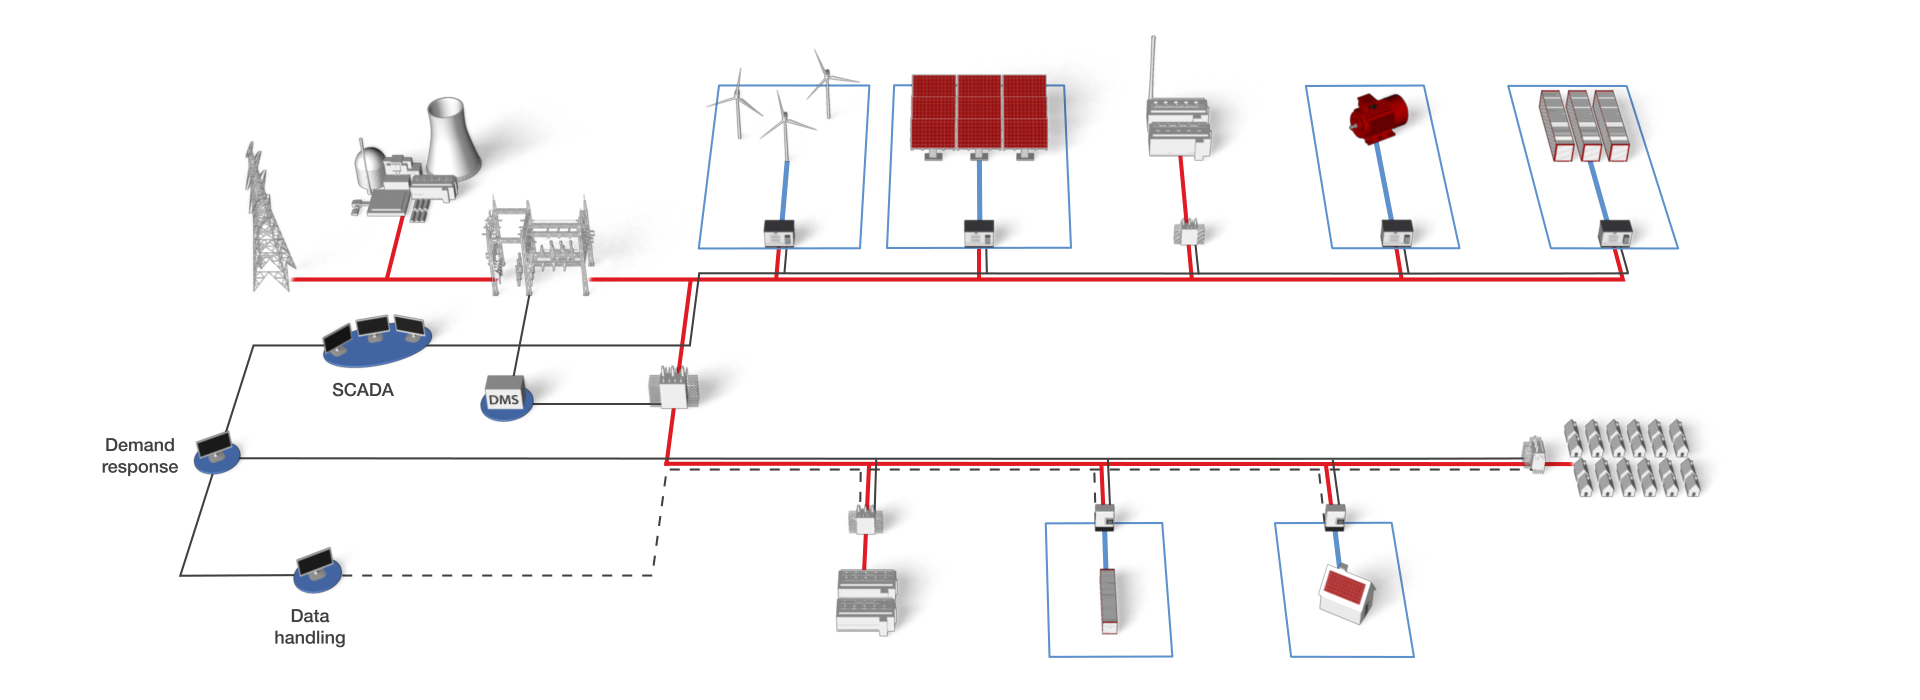 Diagram of a microgrid showing its various components such as wind turbines, generators, transmission towers and energy storage battery etc.